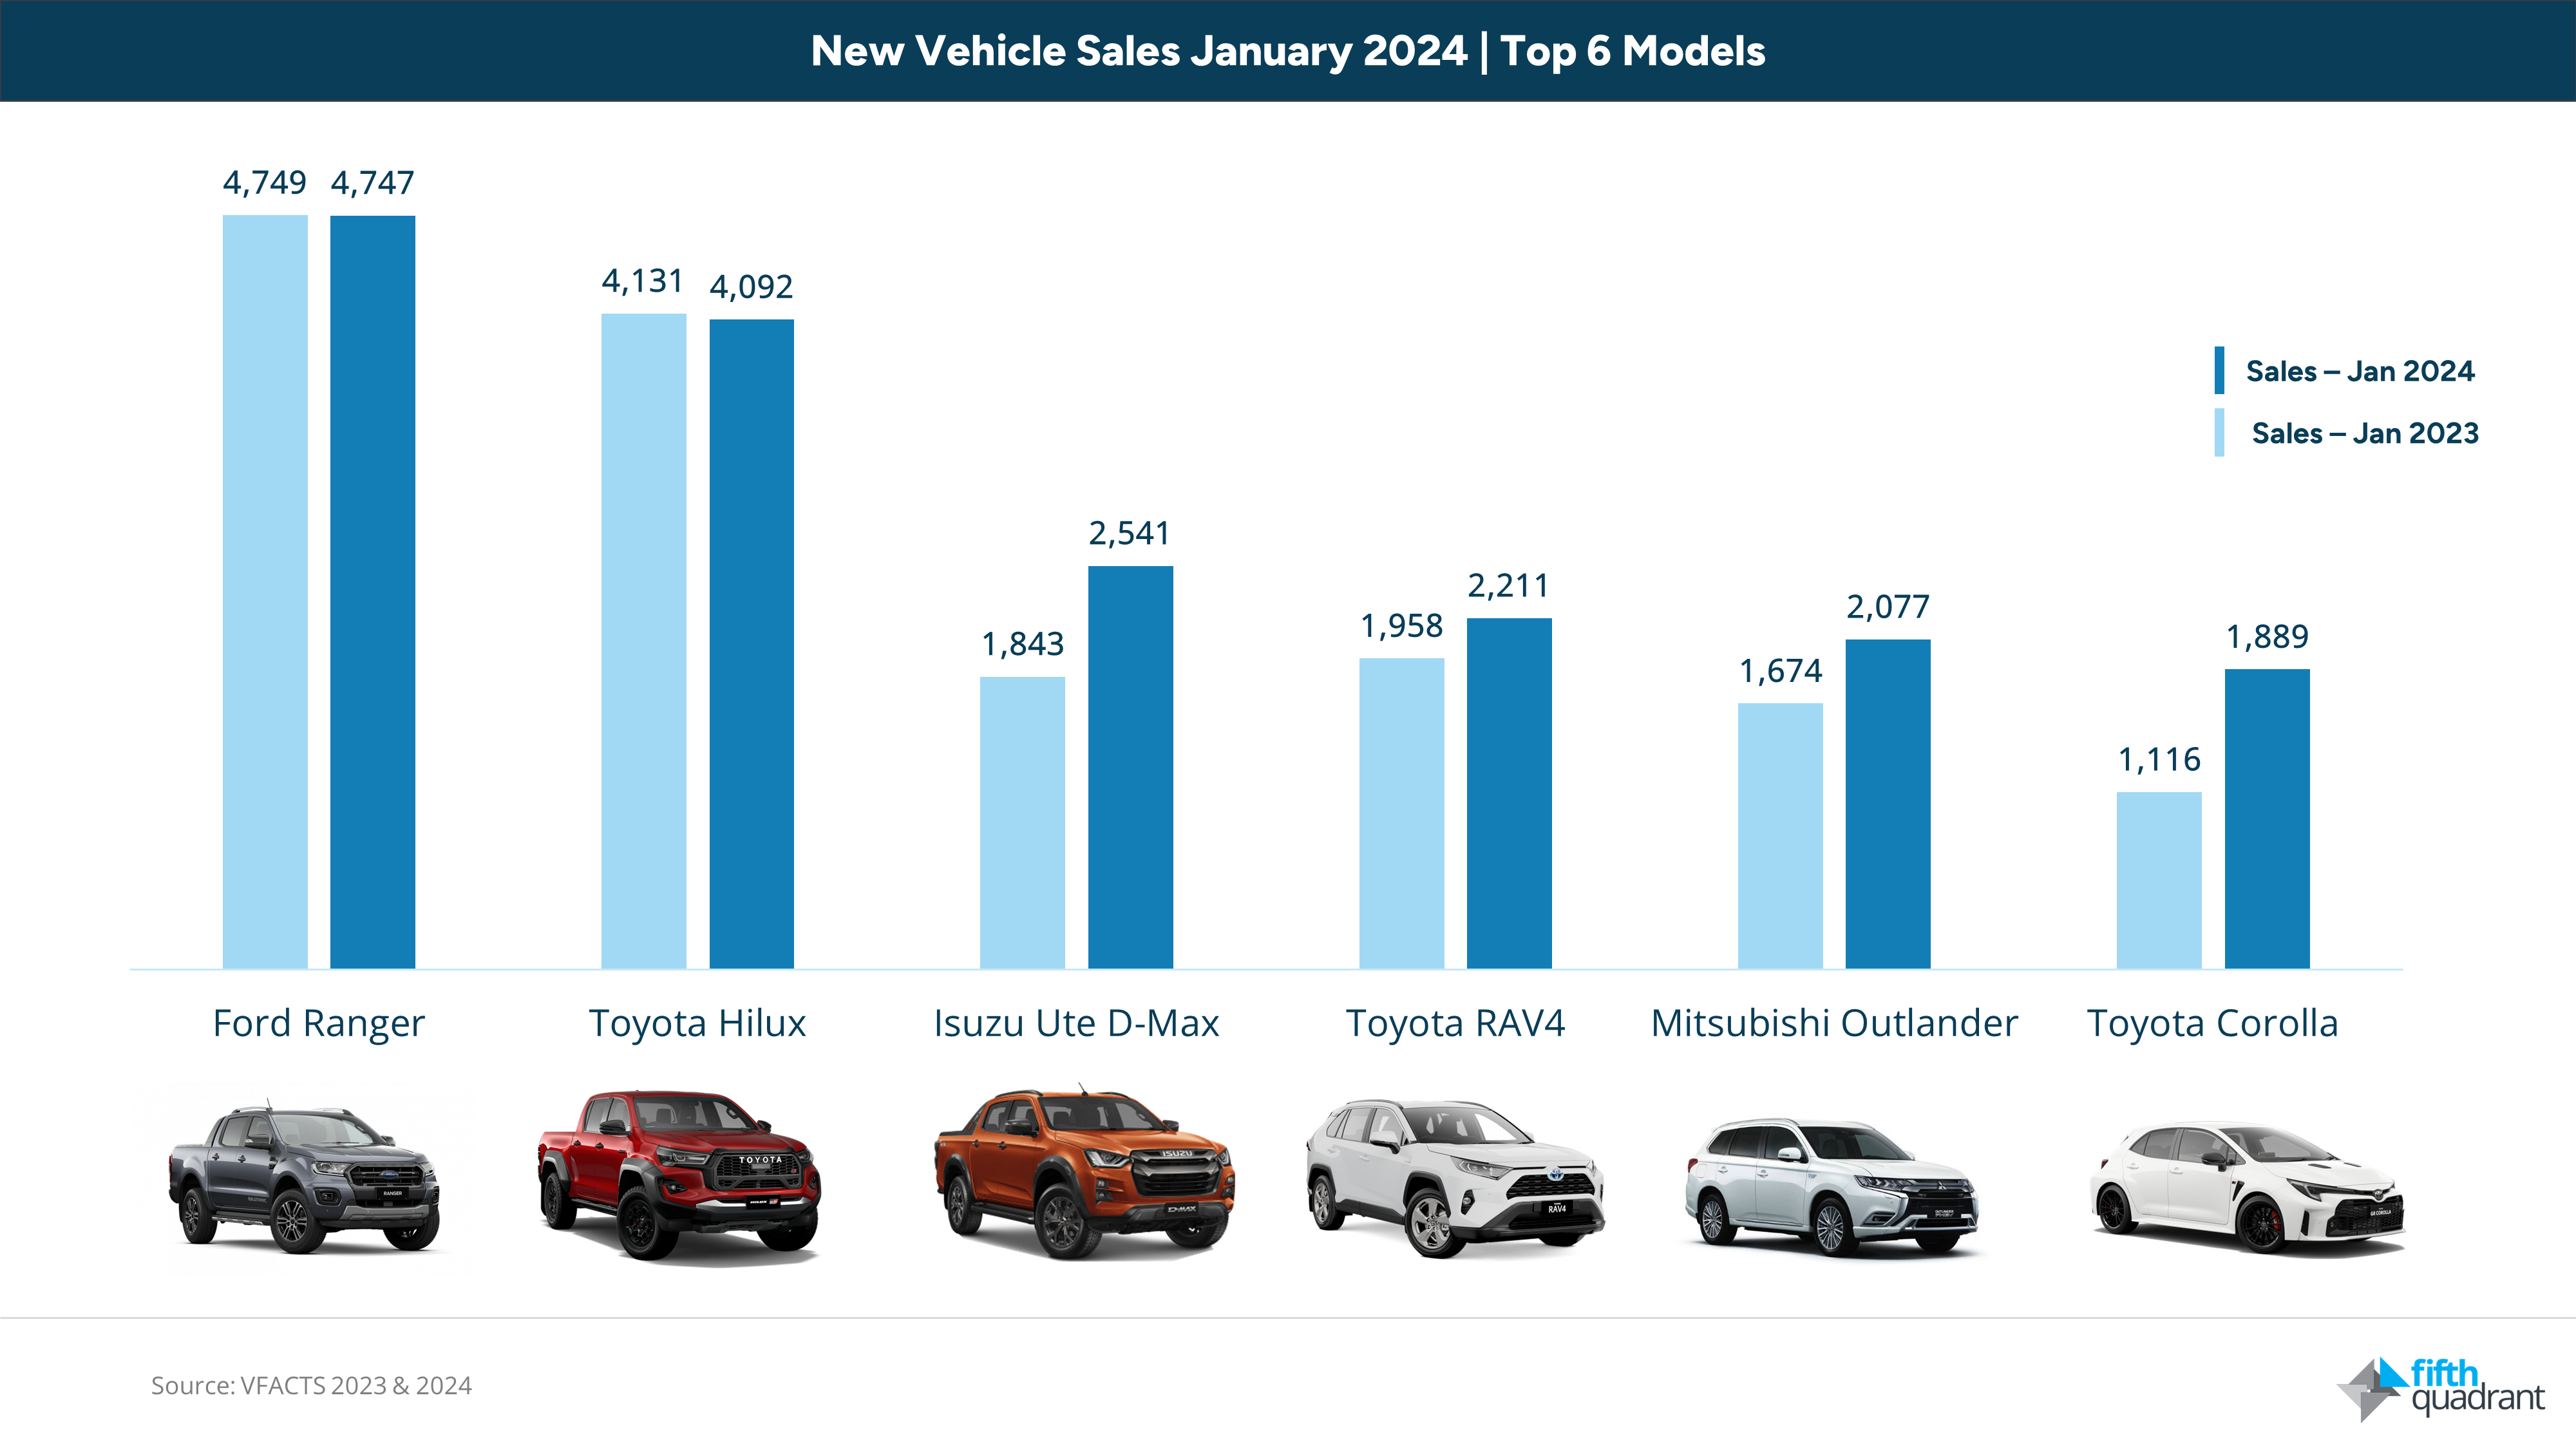 The top 6 new vehicle Models in Australia in January 2024 are: 1 Ford Ranger, 2 Toyota Hilux, 3 Isuzu D-Max, 4 Toyota RAV4, 5 Mitsubishi Outlander, 6 Toyota Corolla.

January 2024 vfacts data.